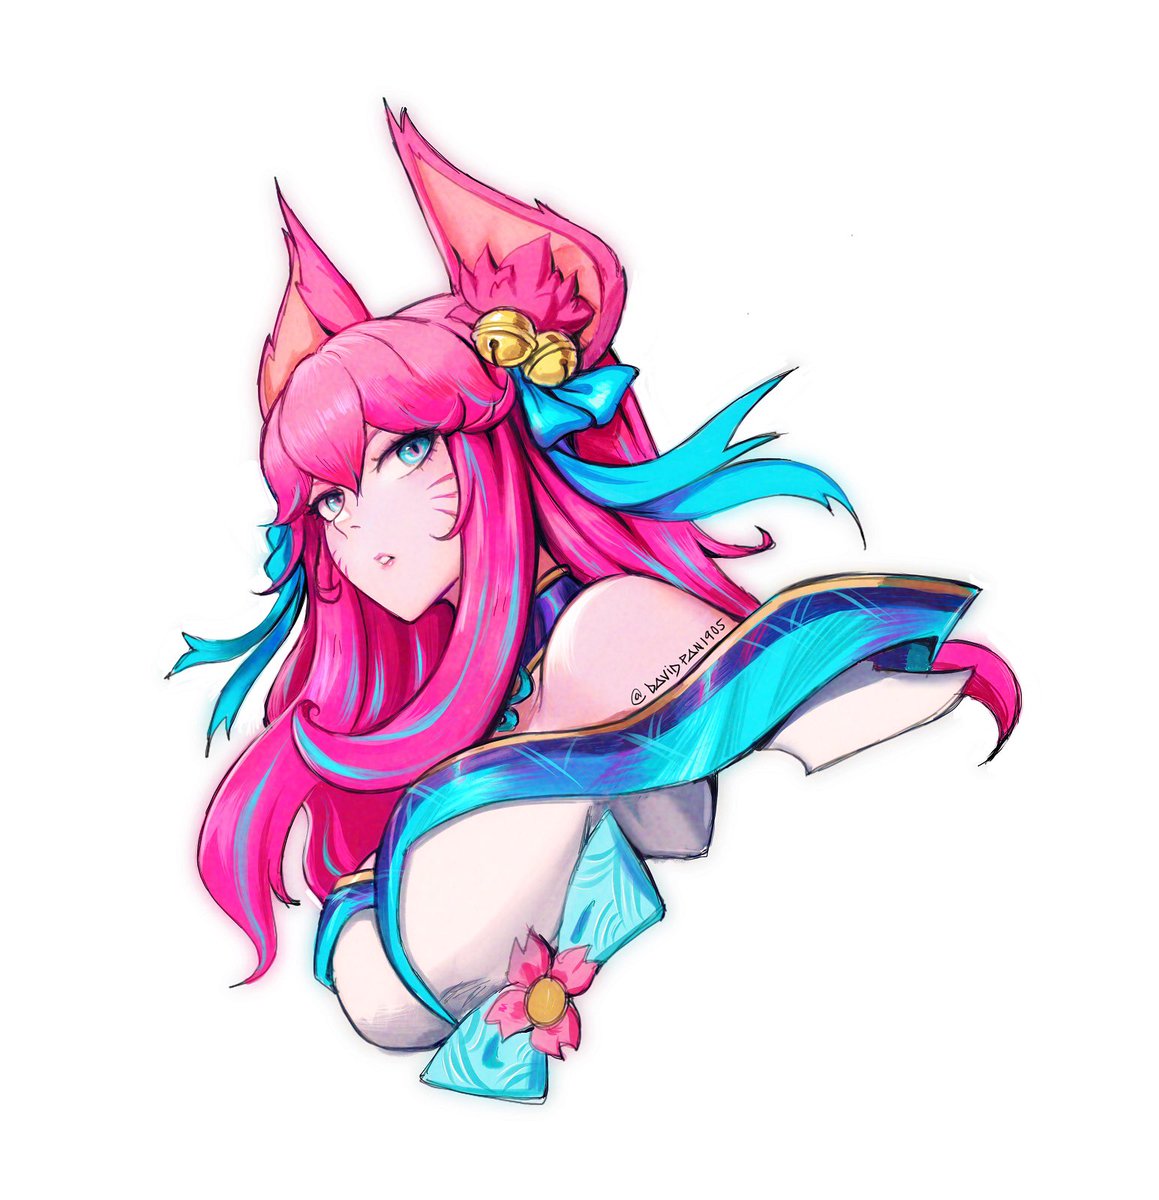 I ve just finished the sketch from last night b4 bed. 
Is it ok if i do the sketchy style like this as a type of commission in the near future?
#SpiritBlossom #SpiritBlossomAhri #Ahri #ArtofLegends